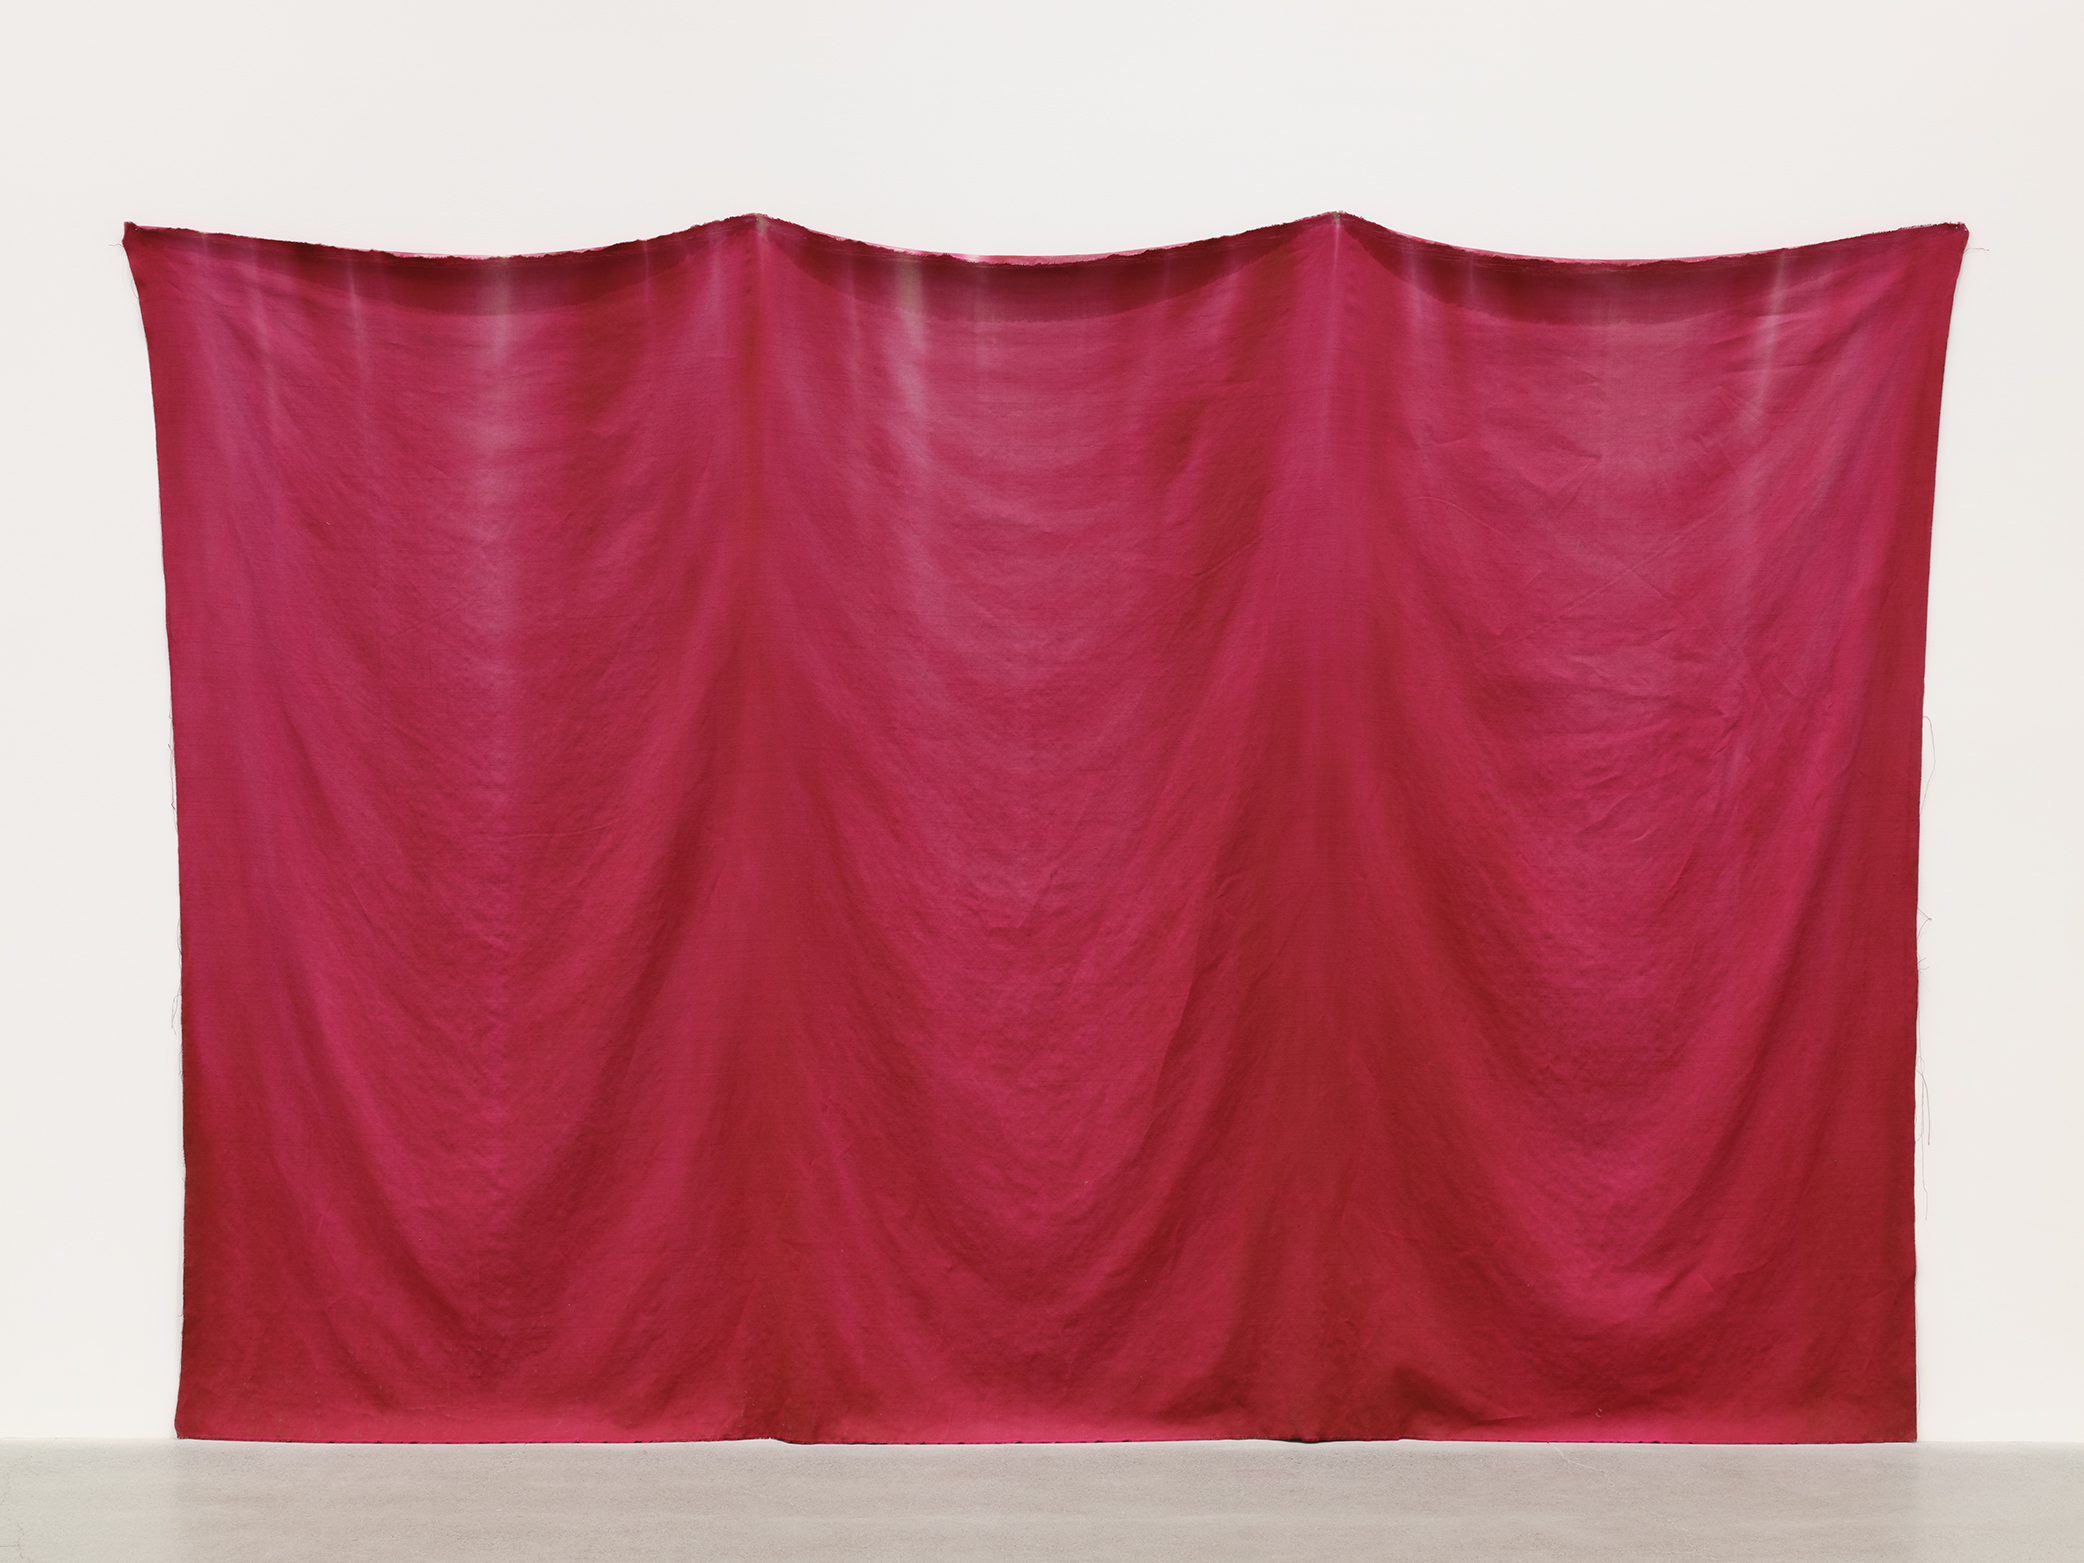 Abbas Akhavan, curtain, 2021, water based pigment on linen, 95 x 101 in. (241 x 257 cm) by 